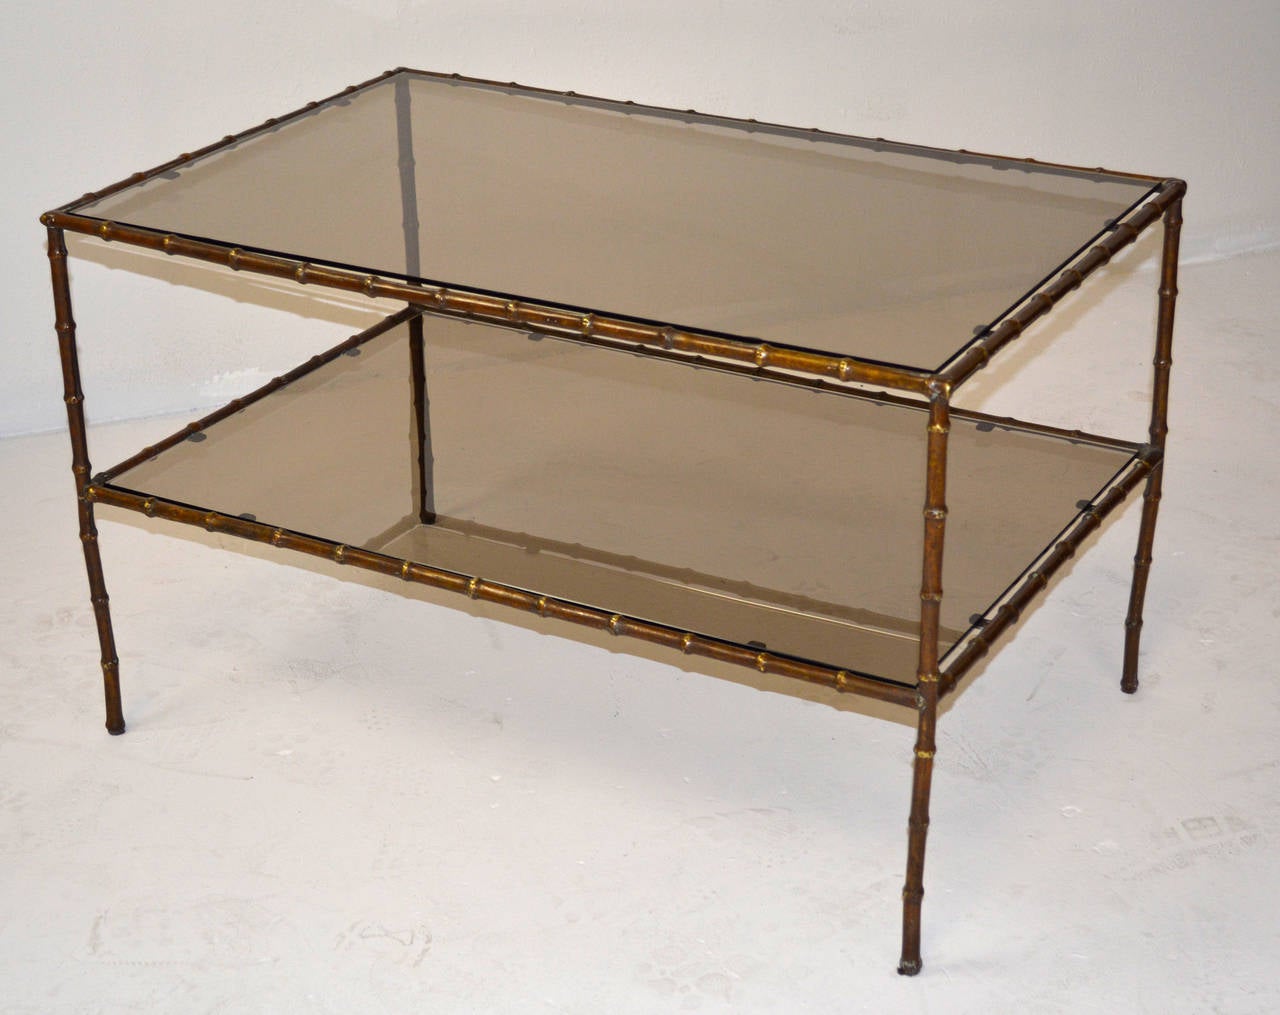 A pair of large-scale side tables with hand-forged bronze faux bamboo frames supporting a bronze glass top and shelf. Exceptional quality in the manner of Maison Baguès and Maison Jansen.